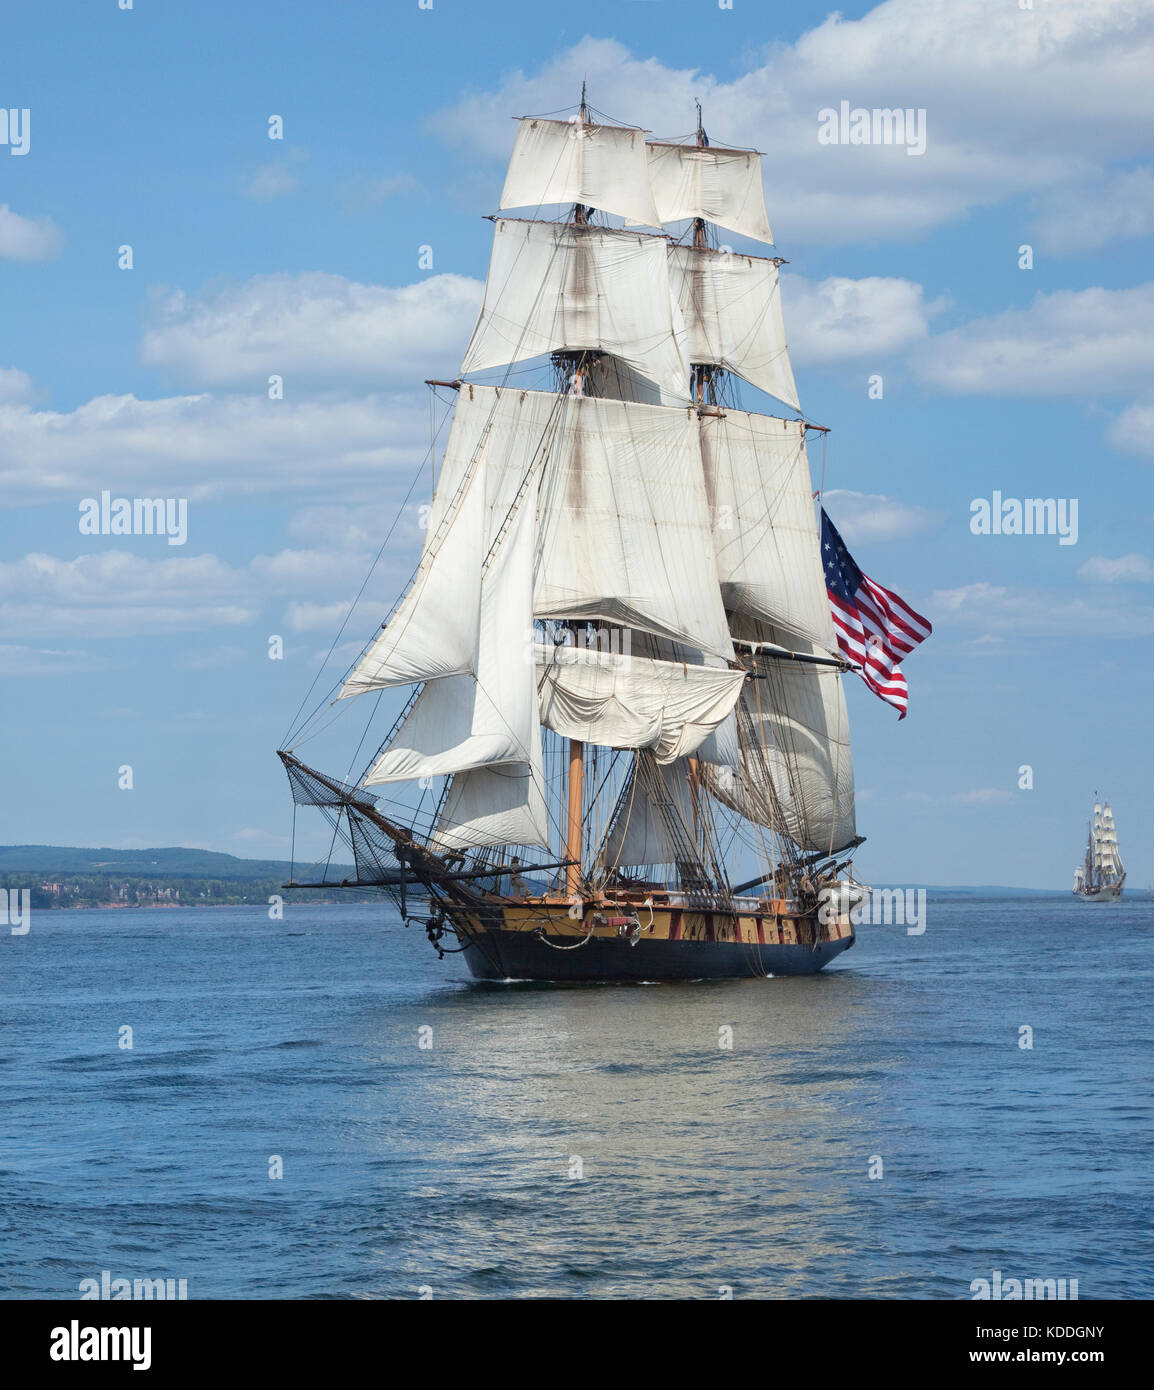 A tall ship known as a brigantine sails on blue water with an American flag flying Stock Photo